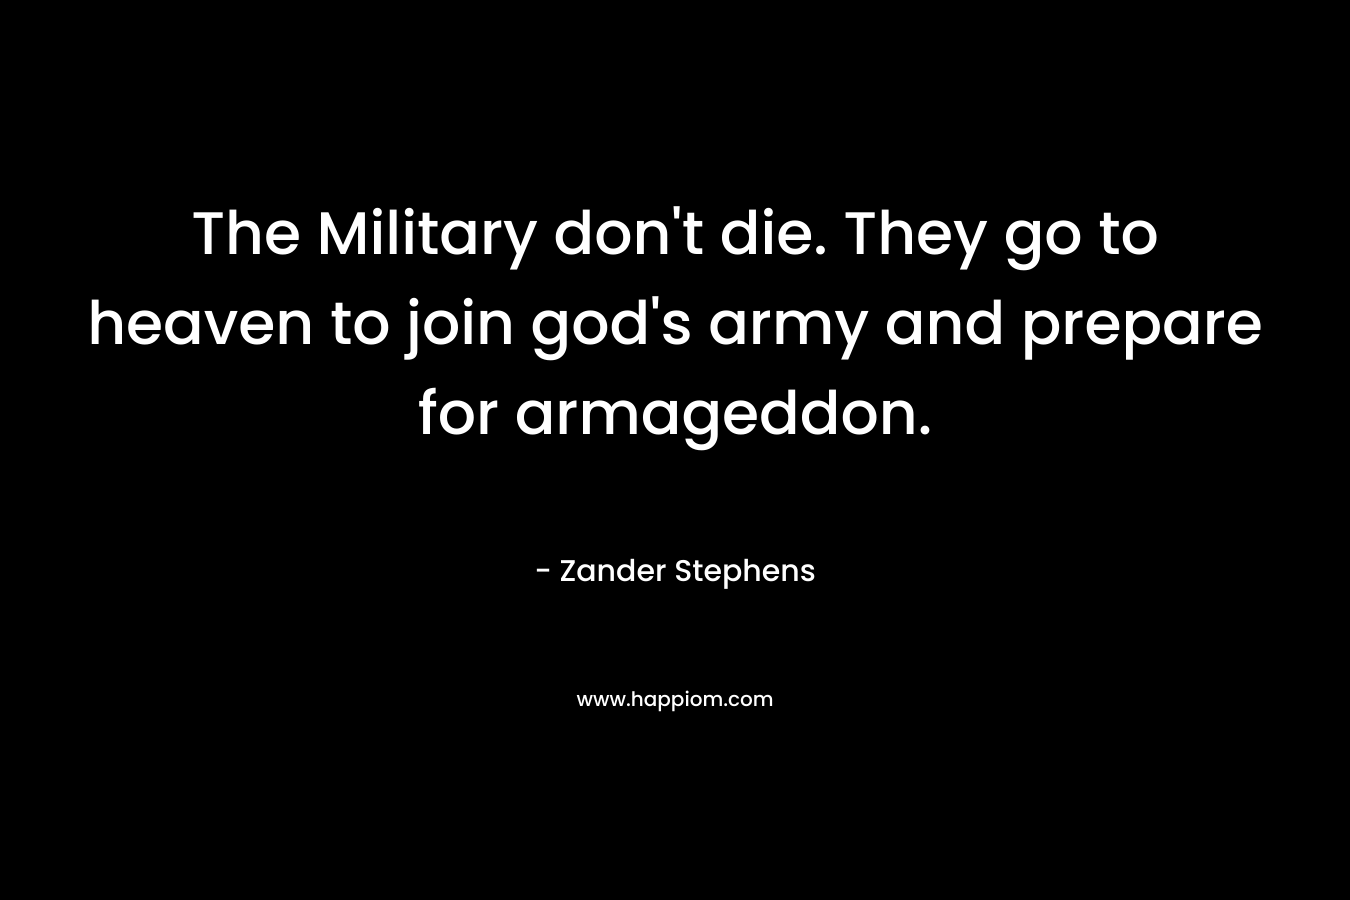 The Military don't die. They go to heaven to join god's army and prepare for armageddon.